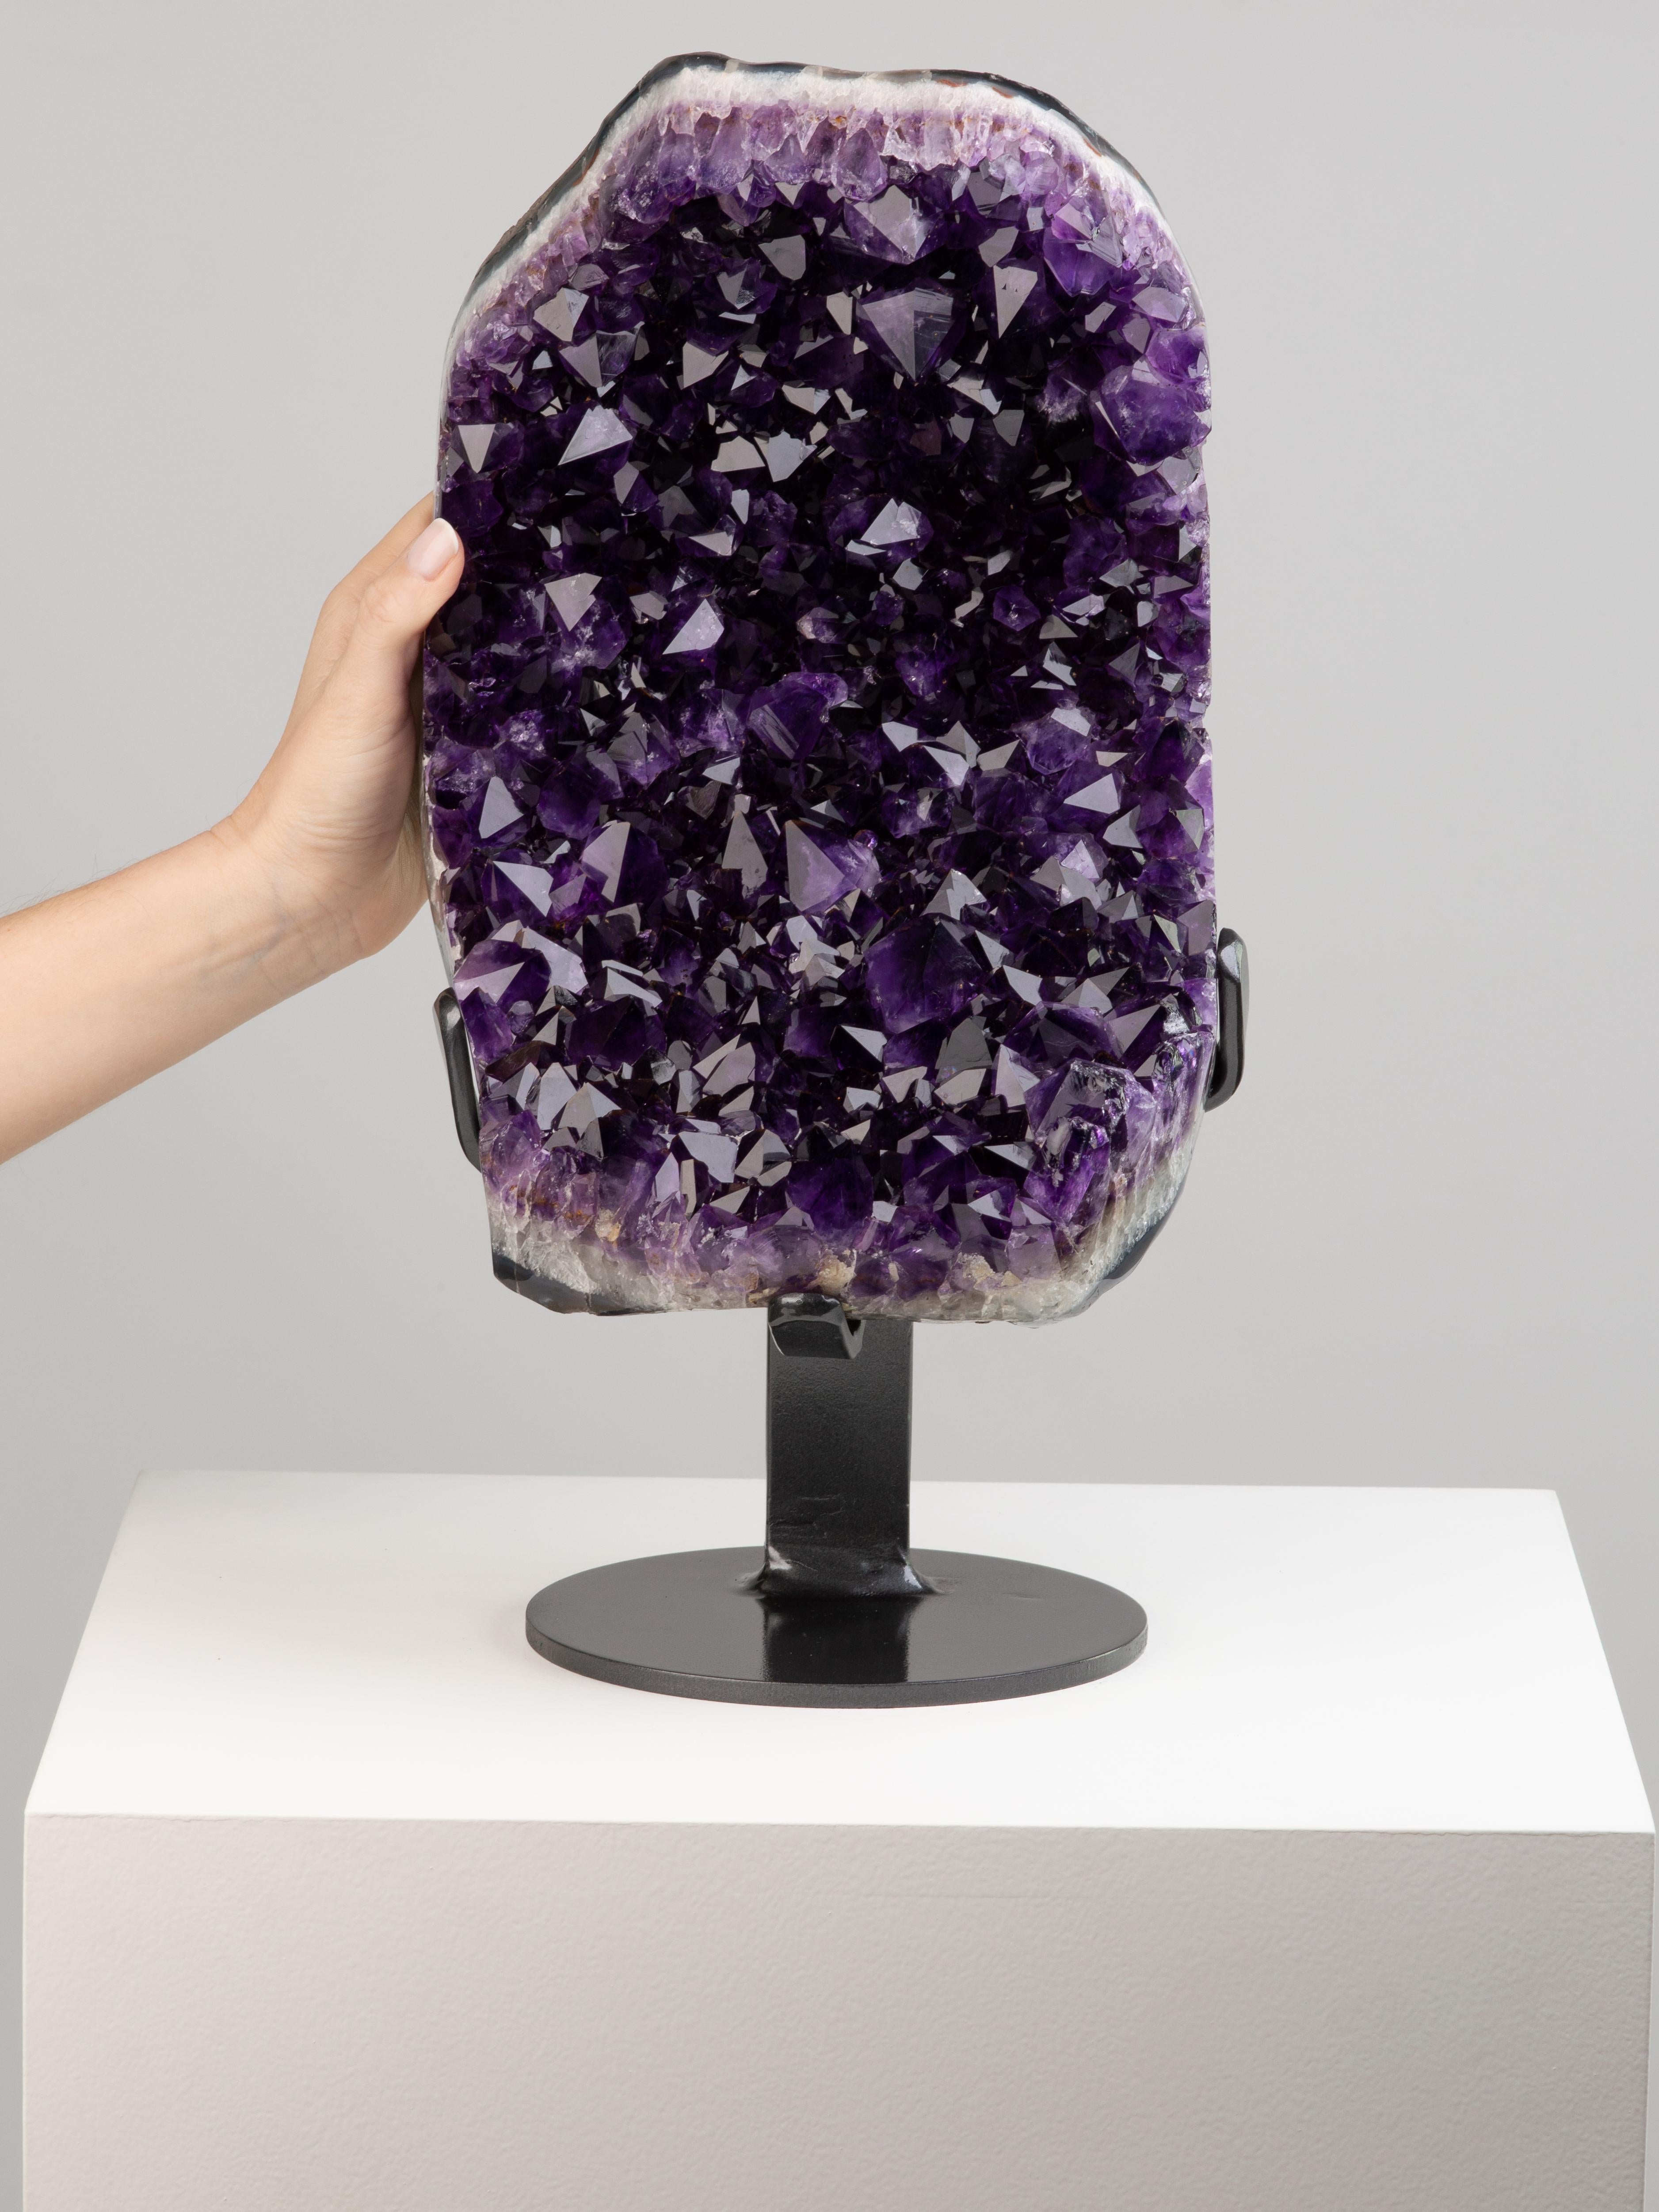 Amethyst of the deepest colour is shown here in a formation resembling
an open mouth. The crystals are of high peaks with red tints toward the
tips. the borders unpolished to reveal the rough quartz and thin exterior
shell.

This piece was